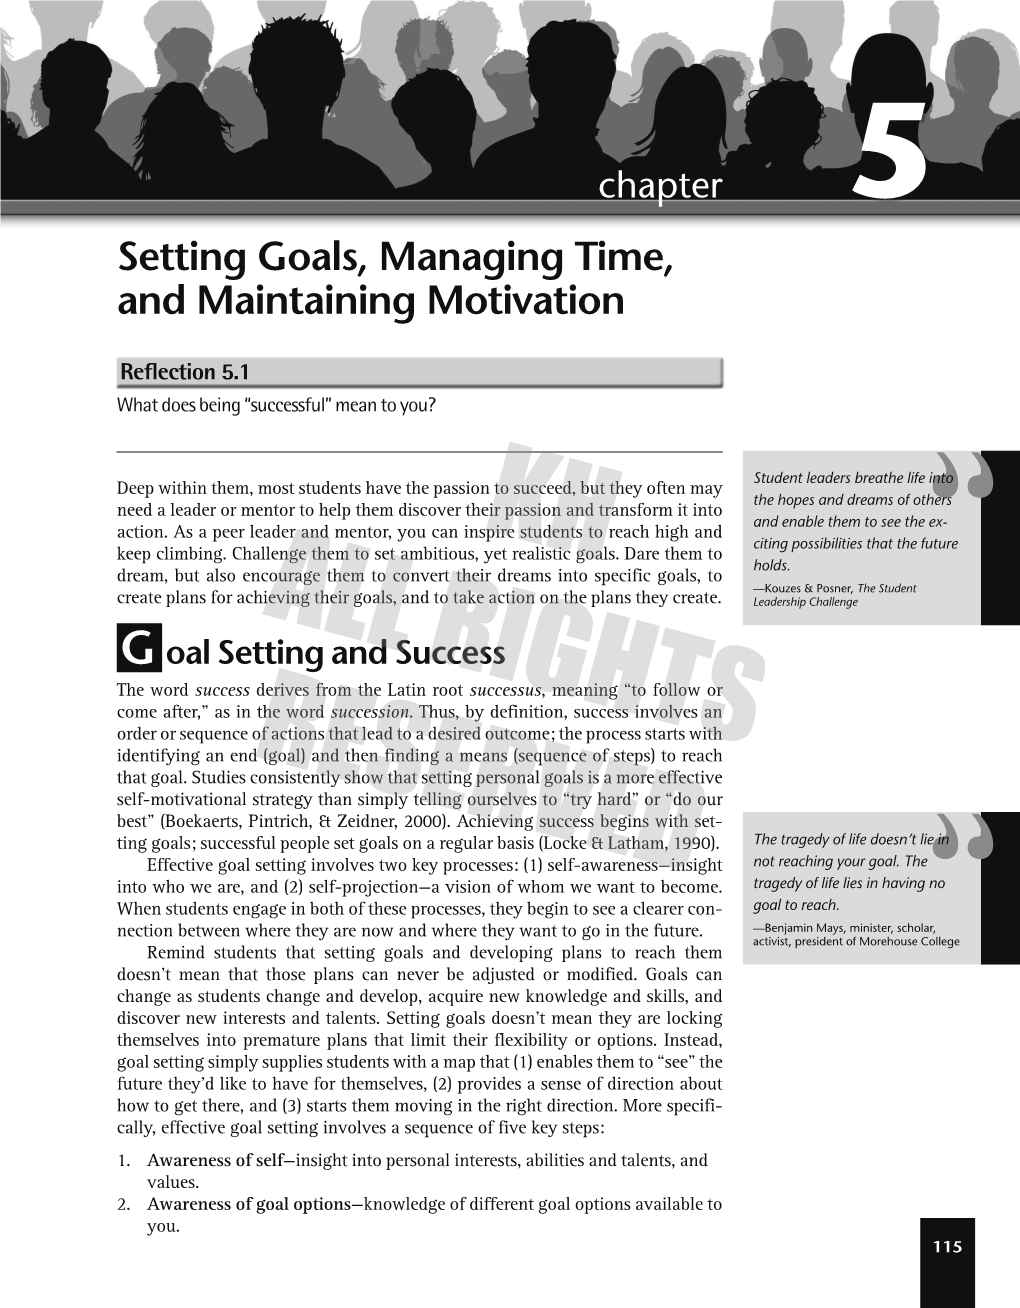 Setting Goals, Managing Time, and Maintaining Motivation